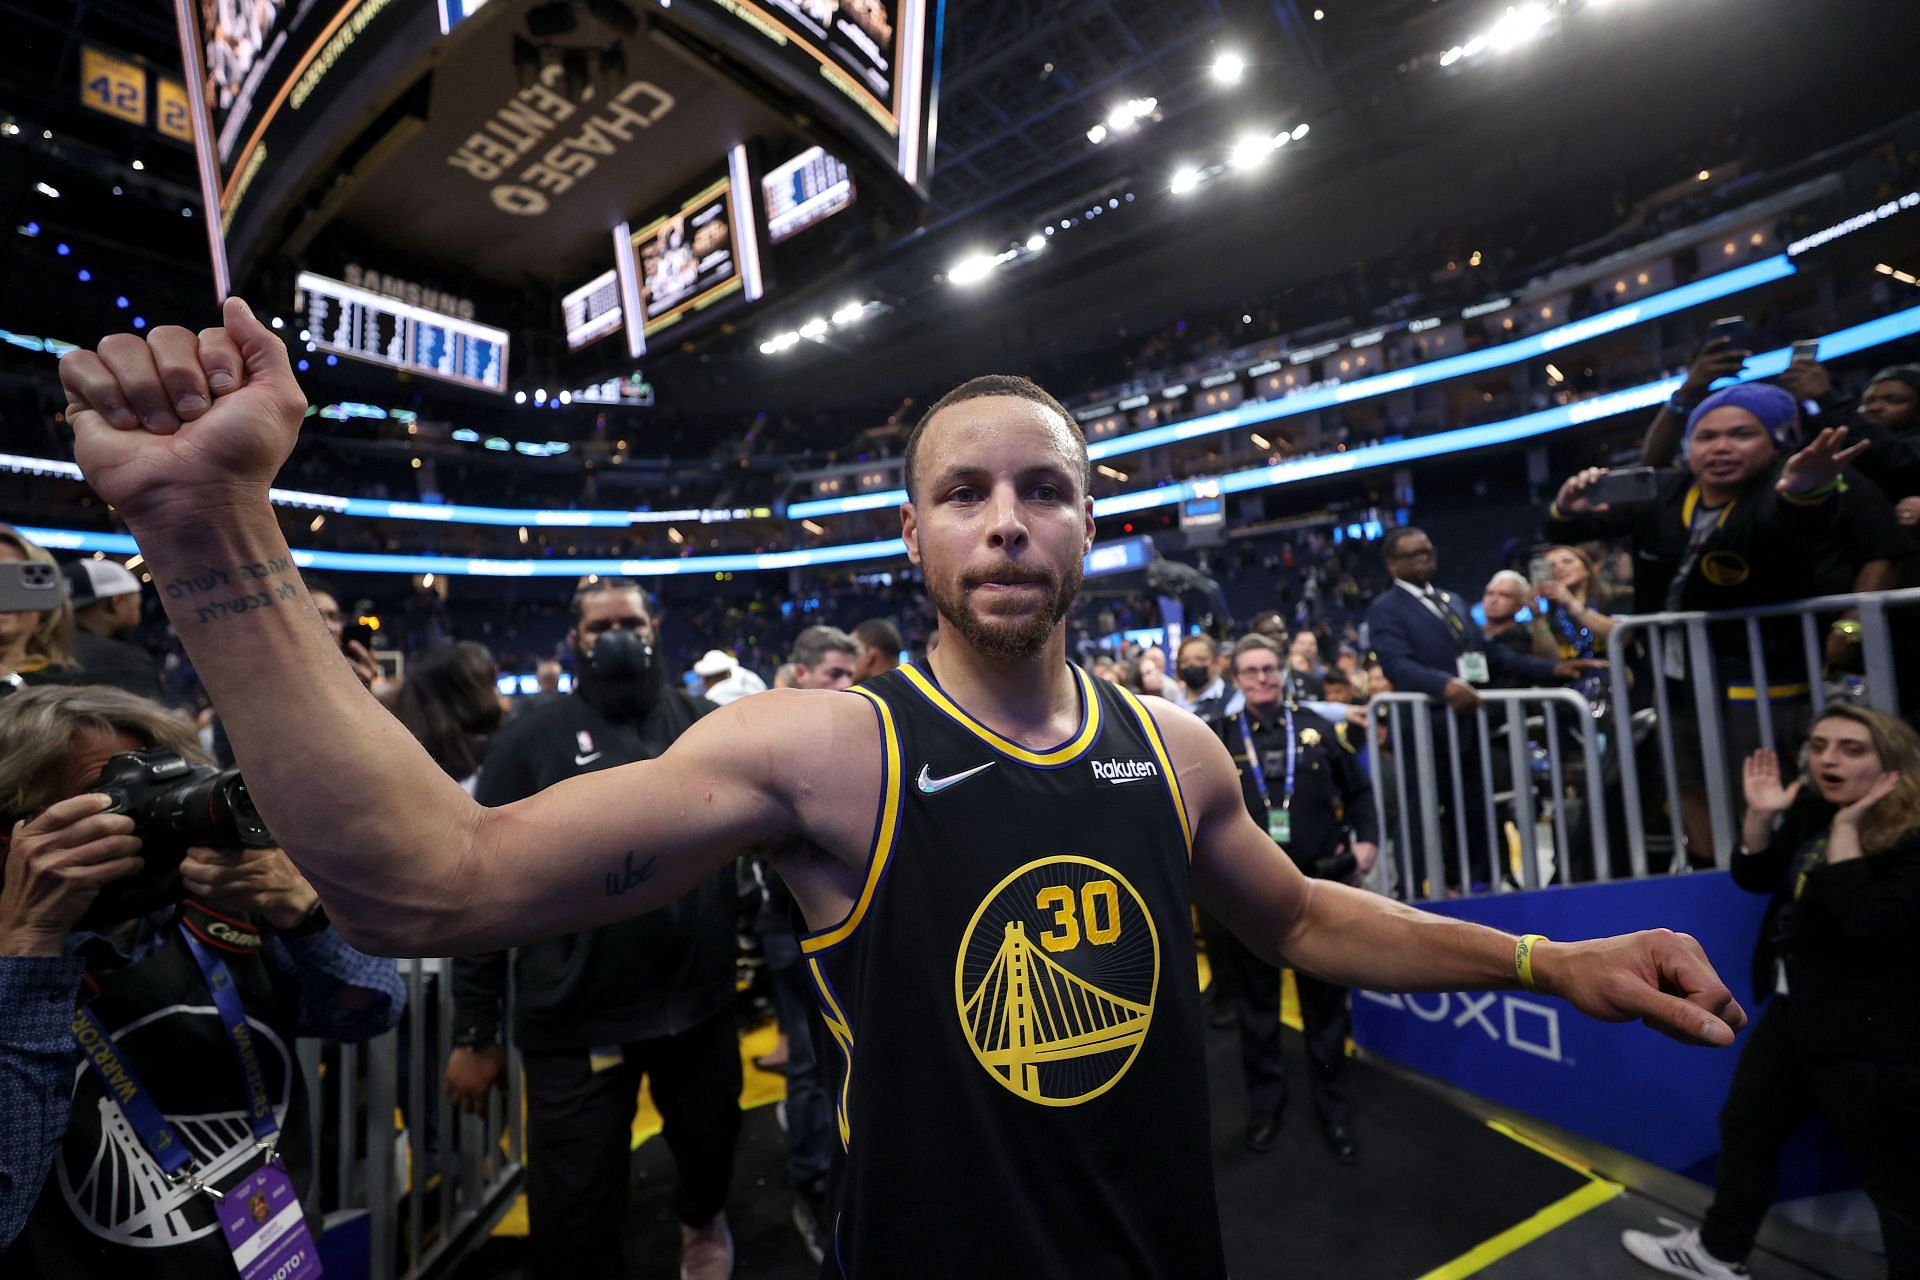 Stephen Curry did not have the best offensive game, but his defense helped secure the win. 